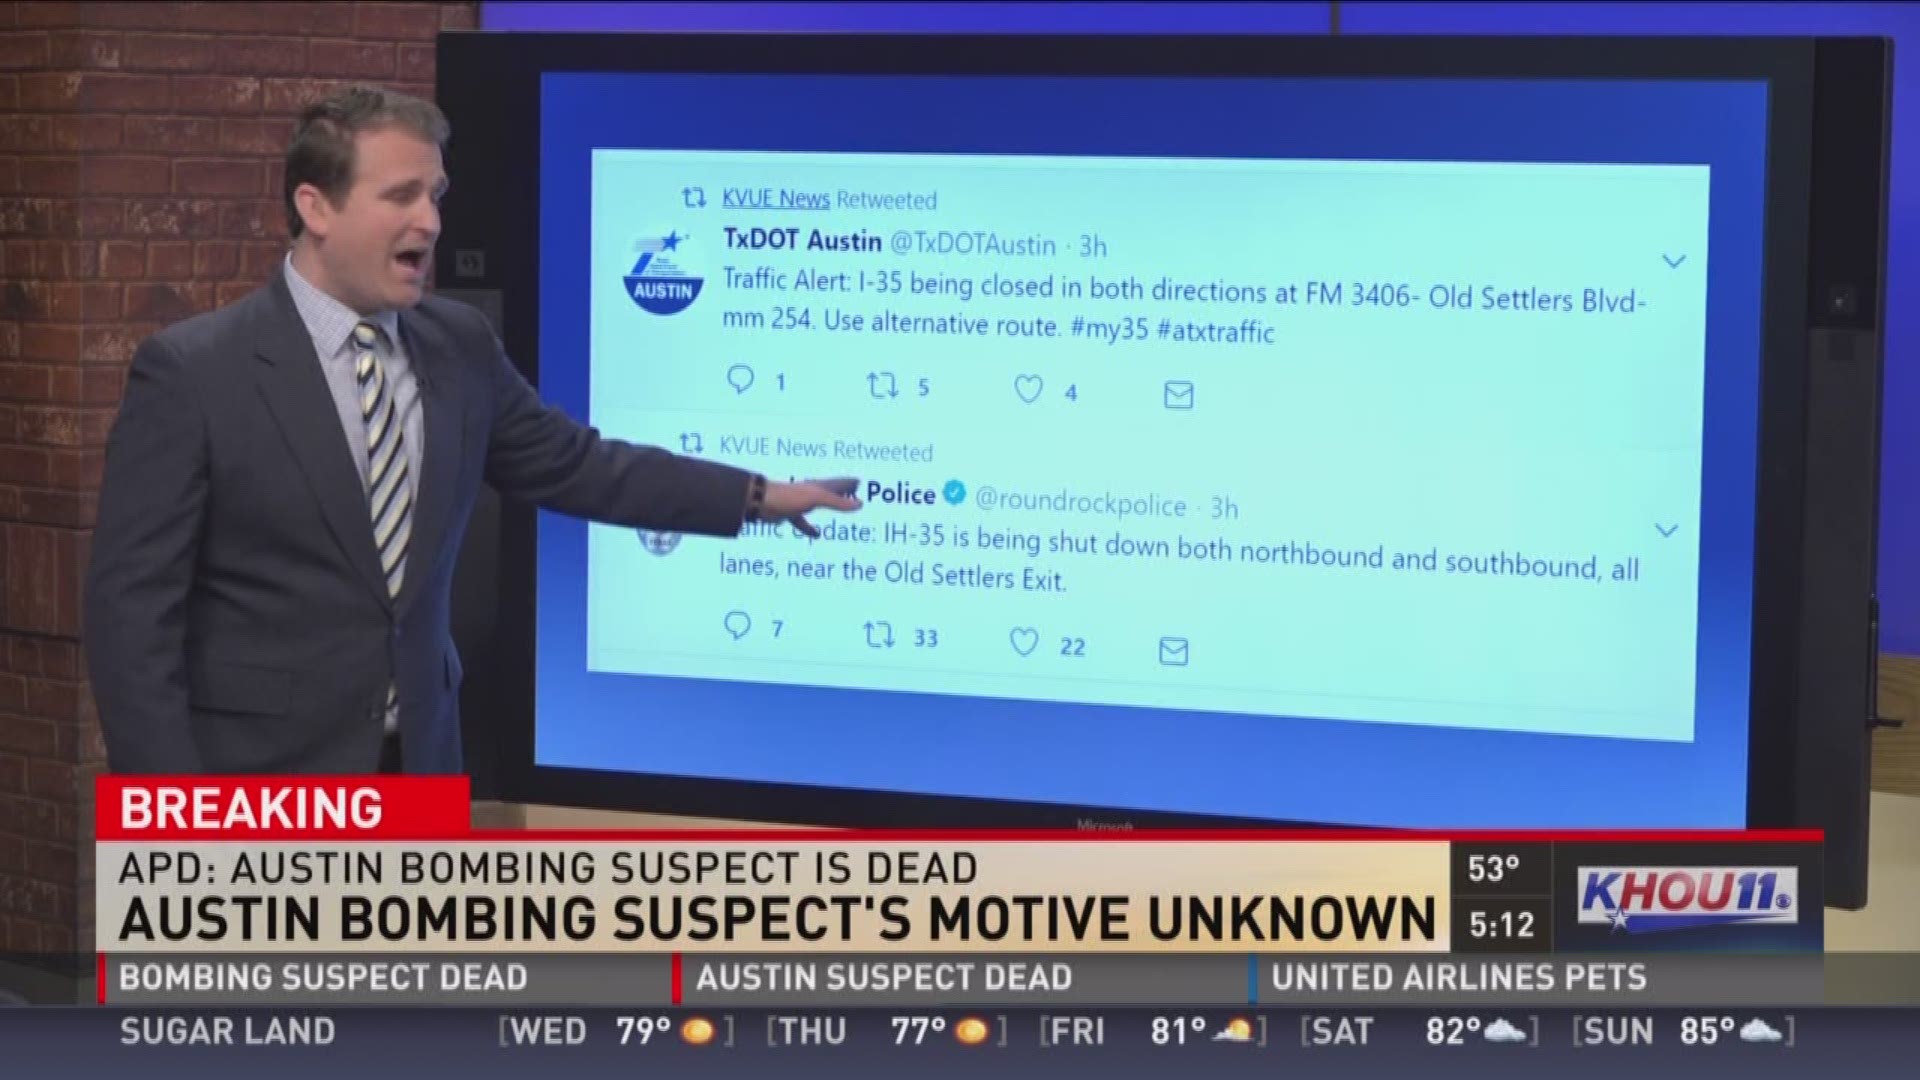 KHOU 11 News This Morning has a timeline of how the suspect's capture and death occurred early Wednesday